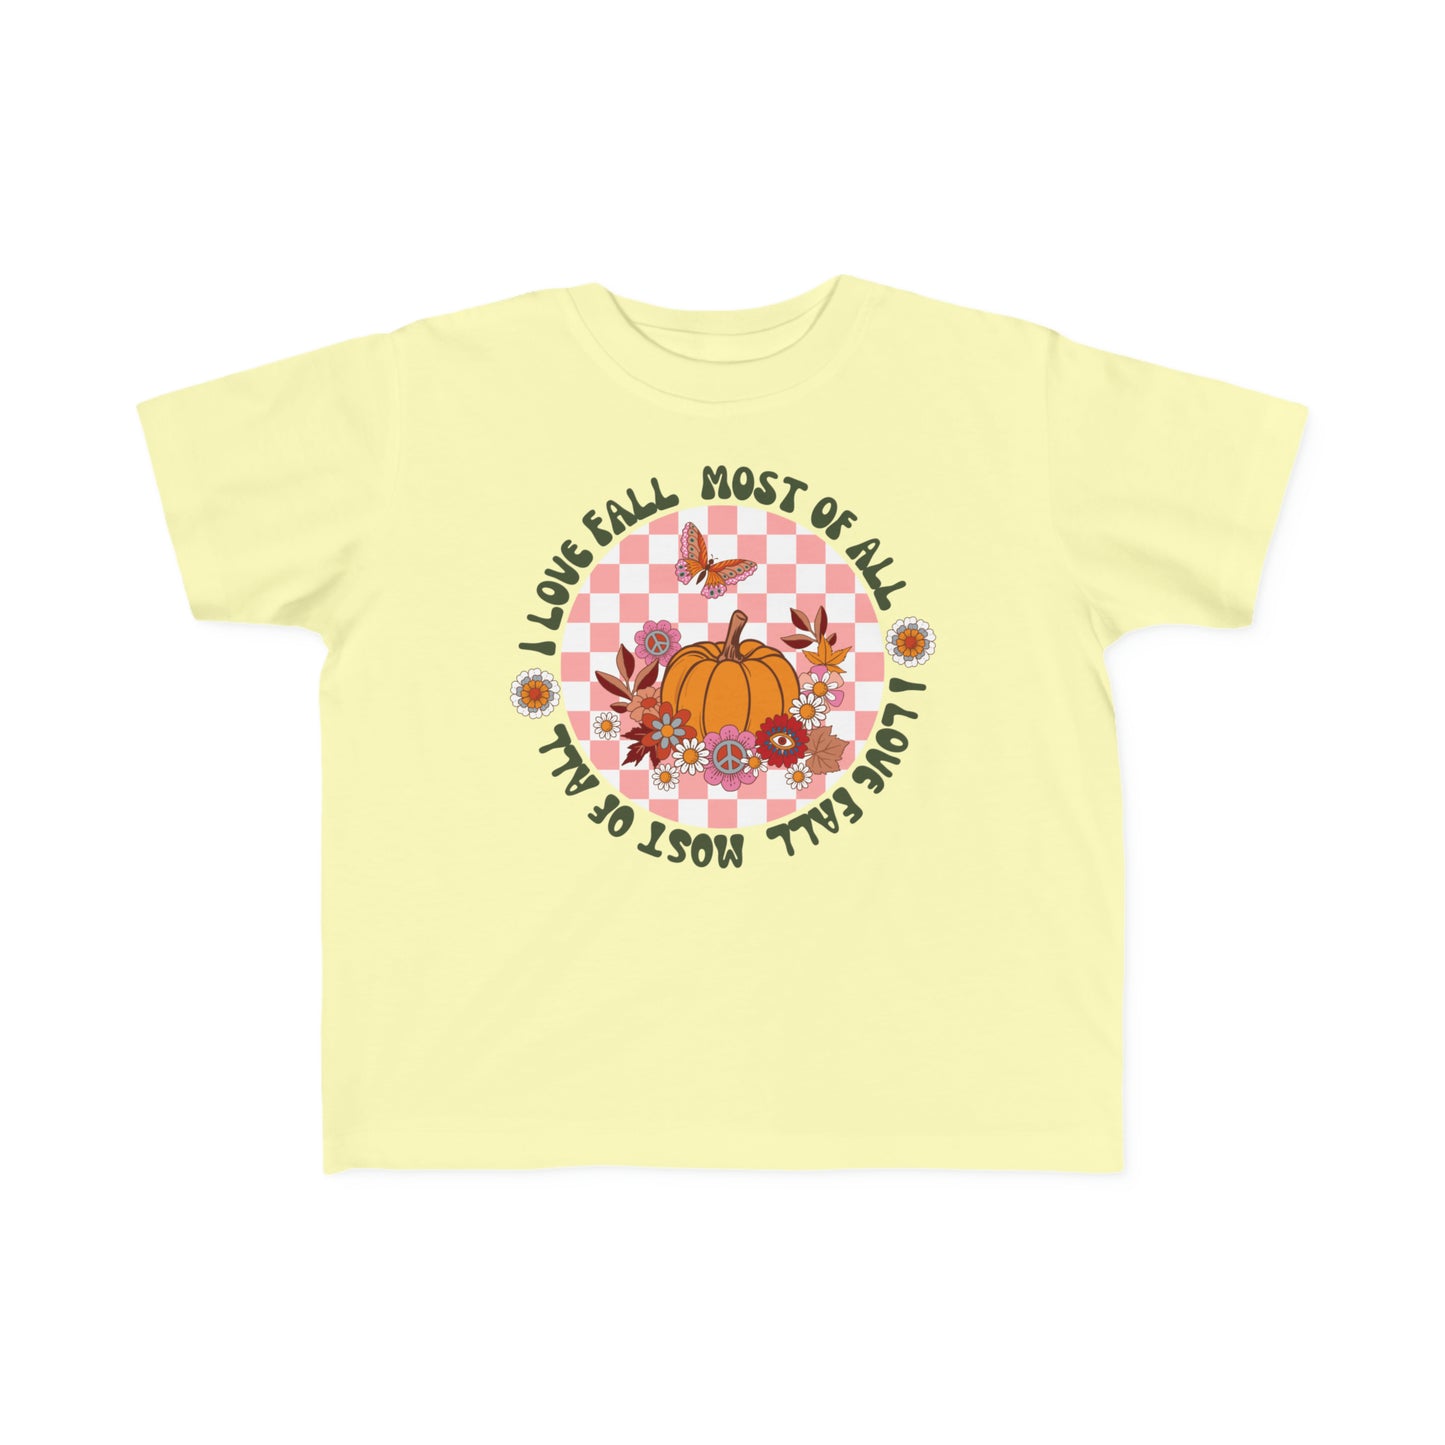 I Love Fall Most of All  Toddler's Fine Jersey Tee